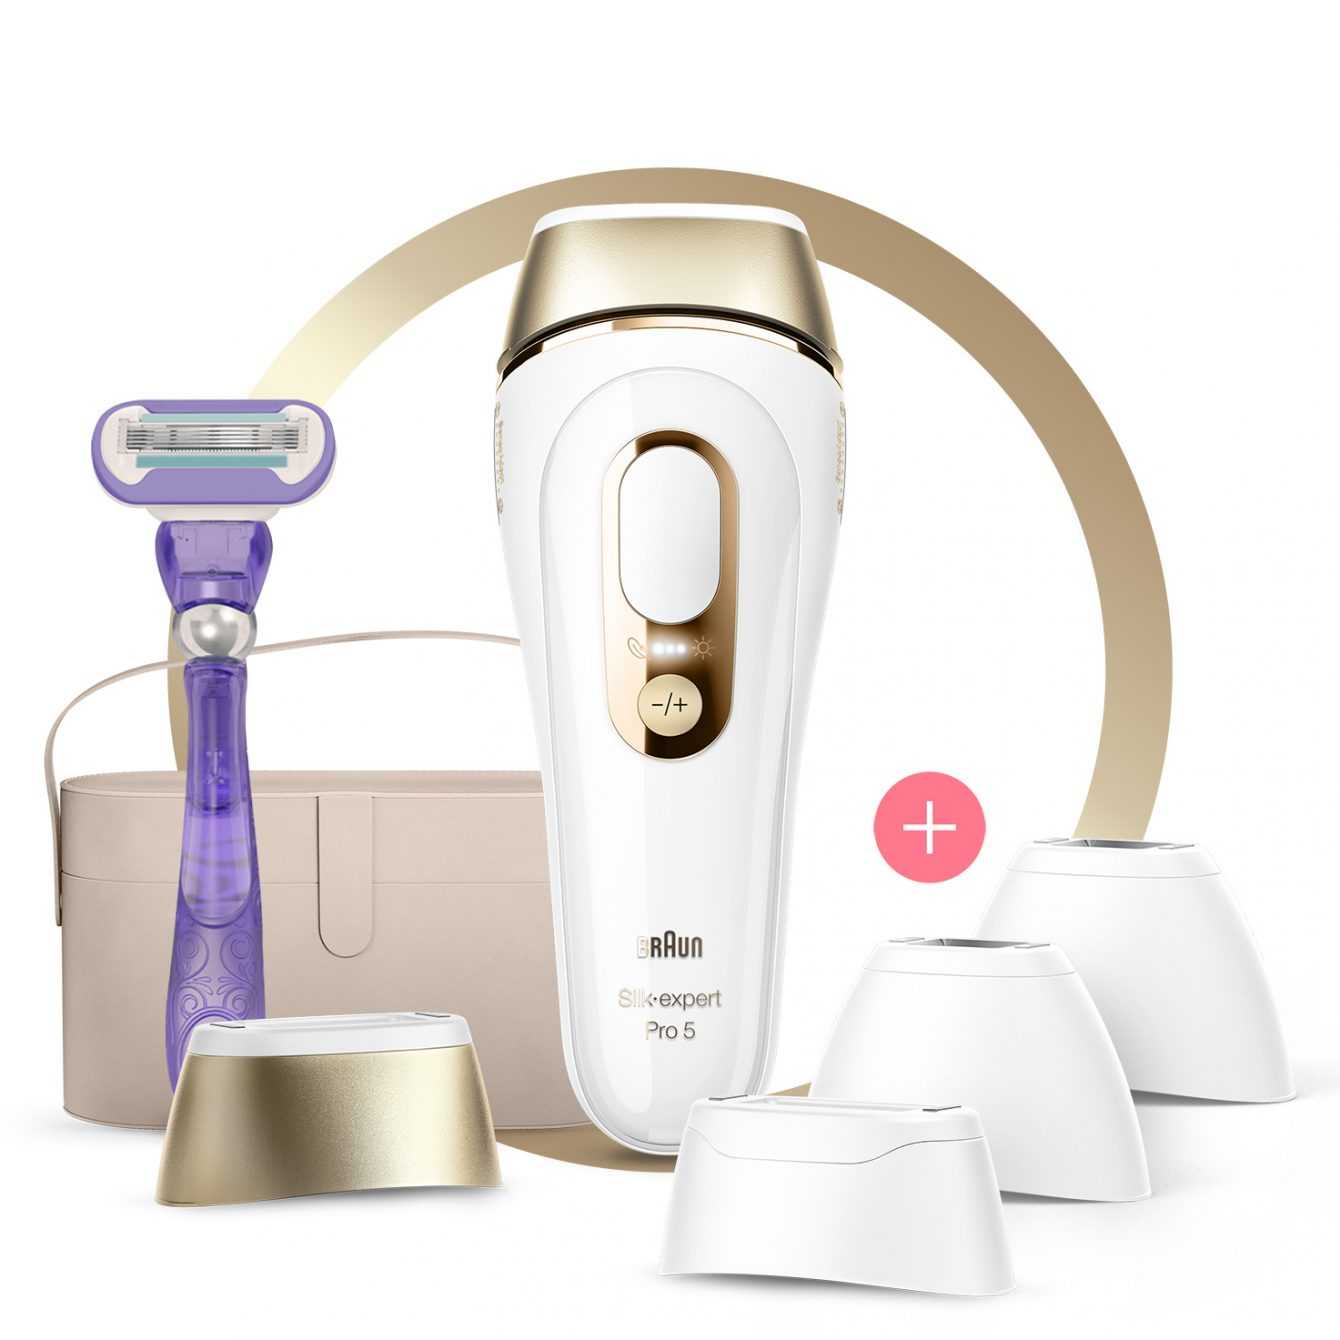 Braun and Belén: together for the new Silk-expert Pro 5 campaign